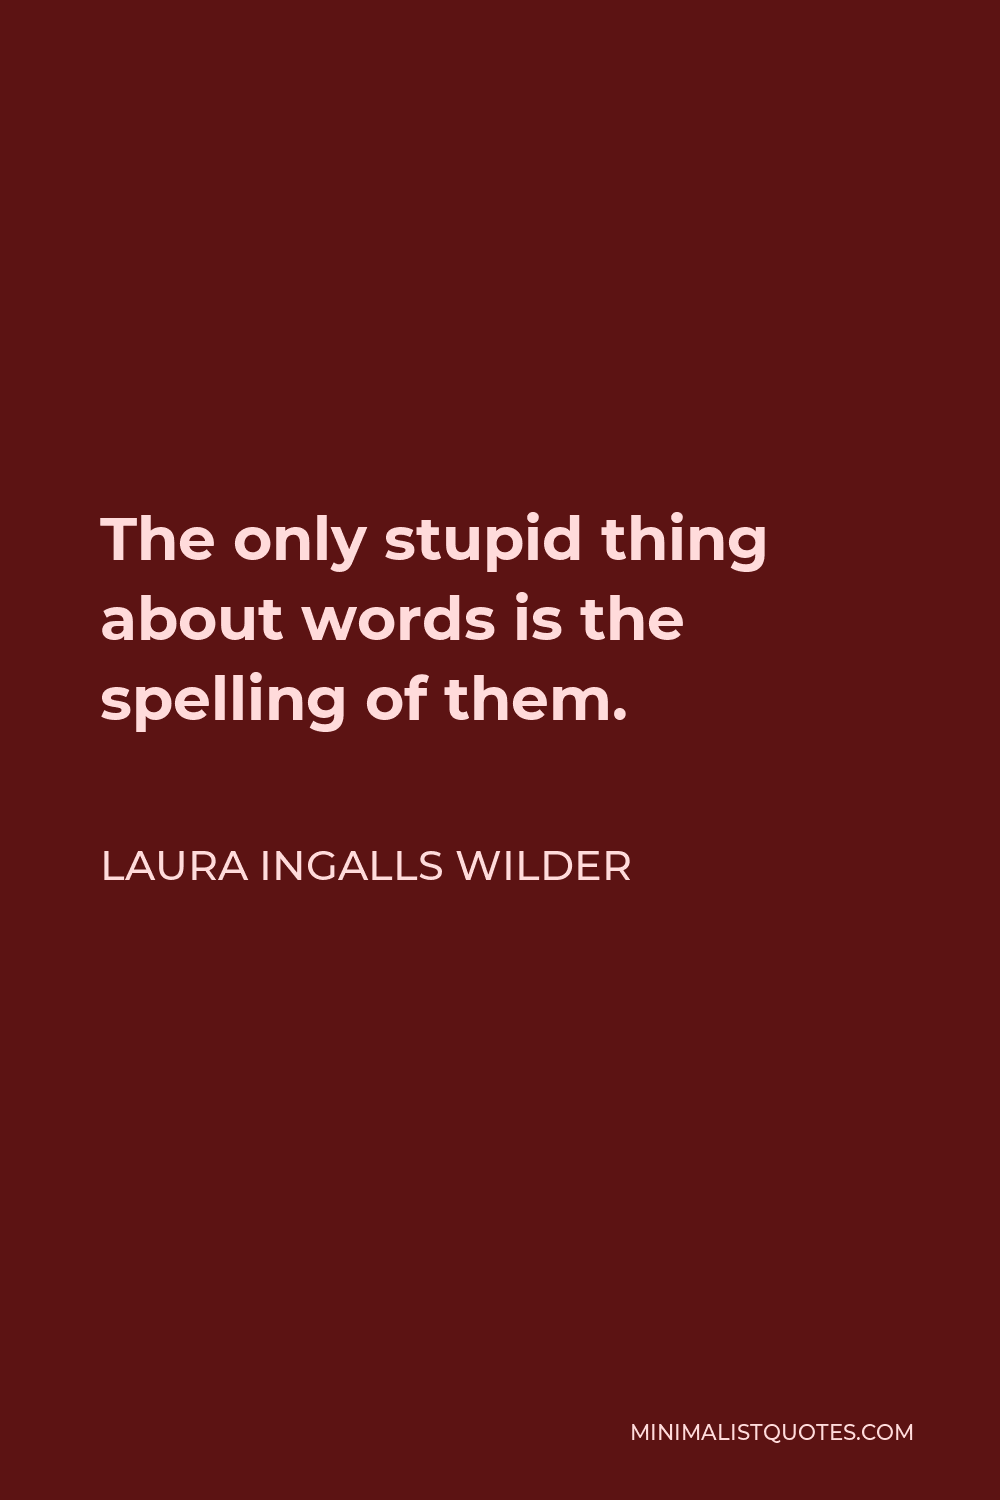 Laura Ingalls Wilder Quote - The only stupid thing about words is the spelling of them.